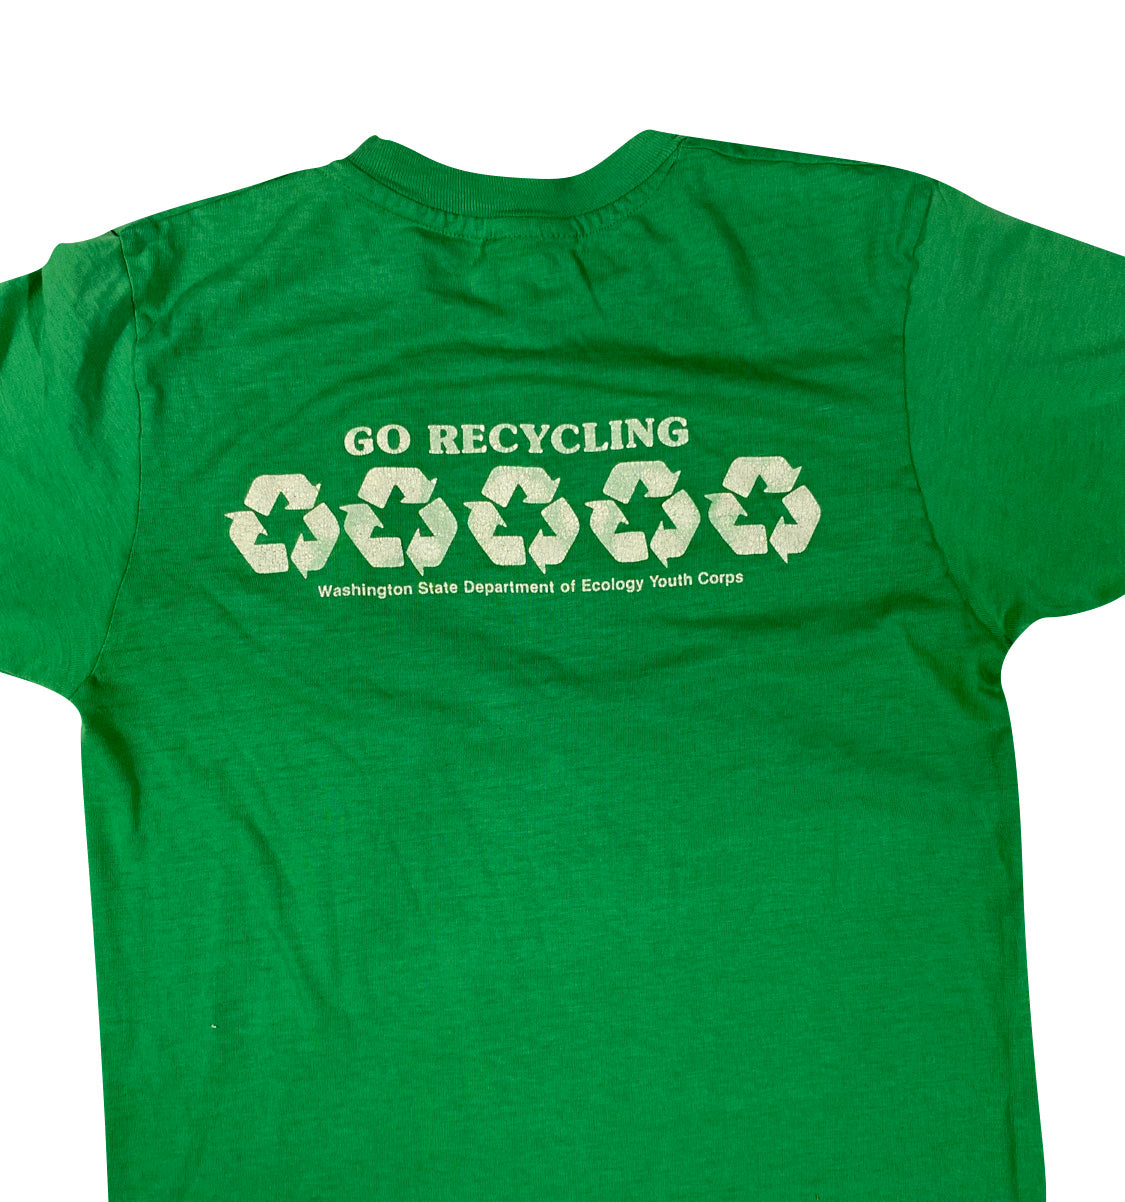 80s Go recycling tee Small fit